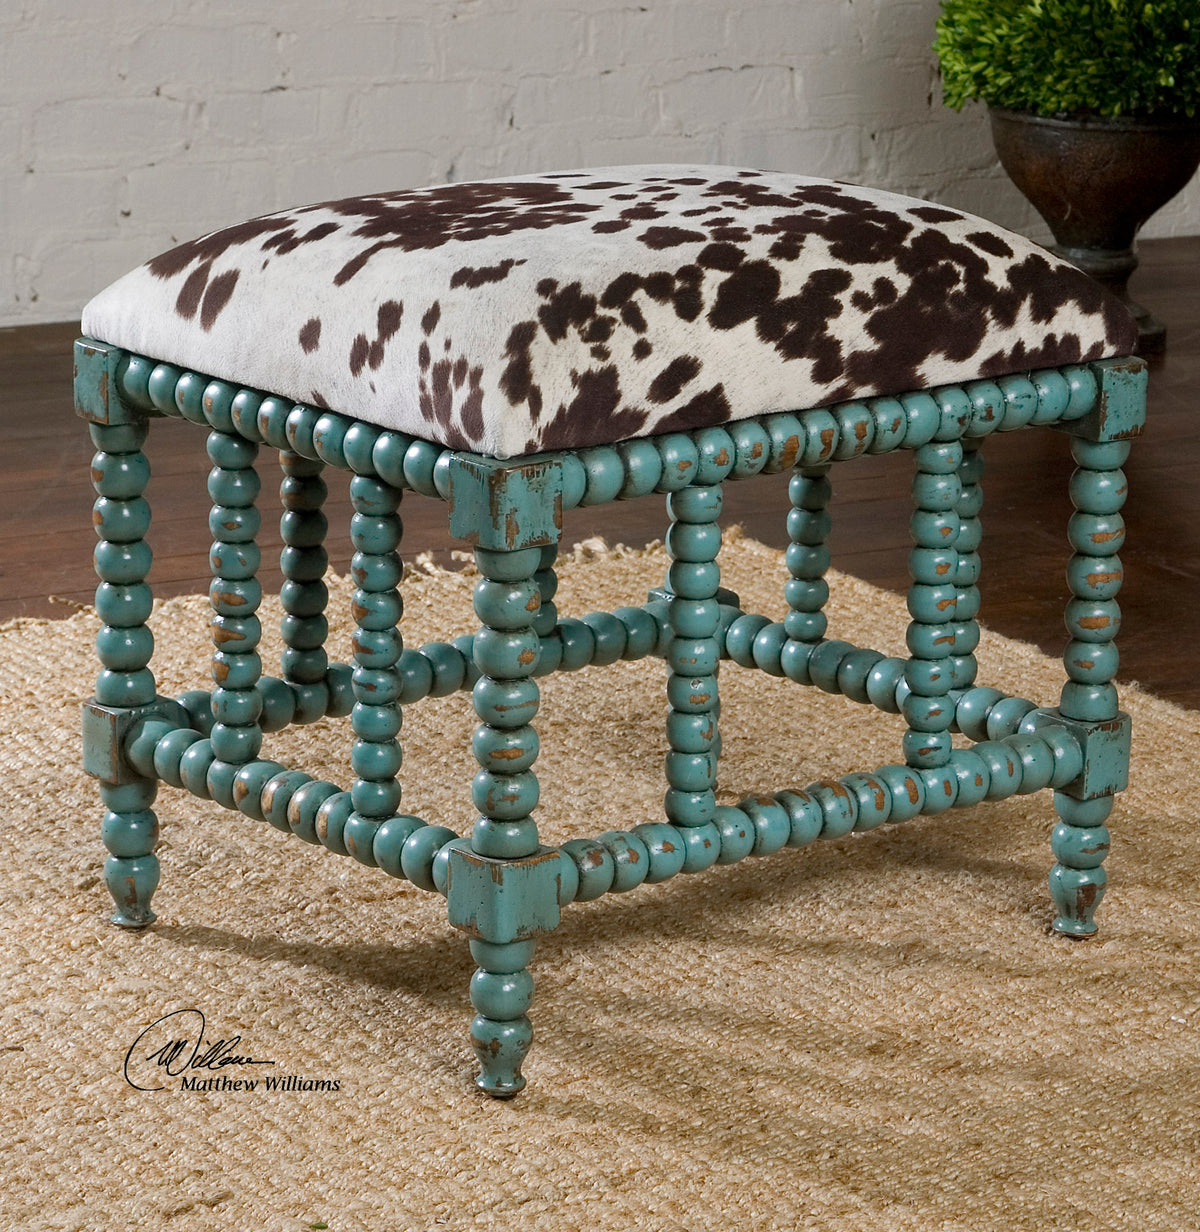 Chahna Small Bench